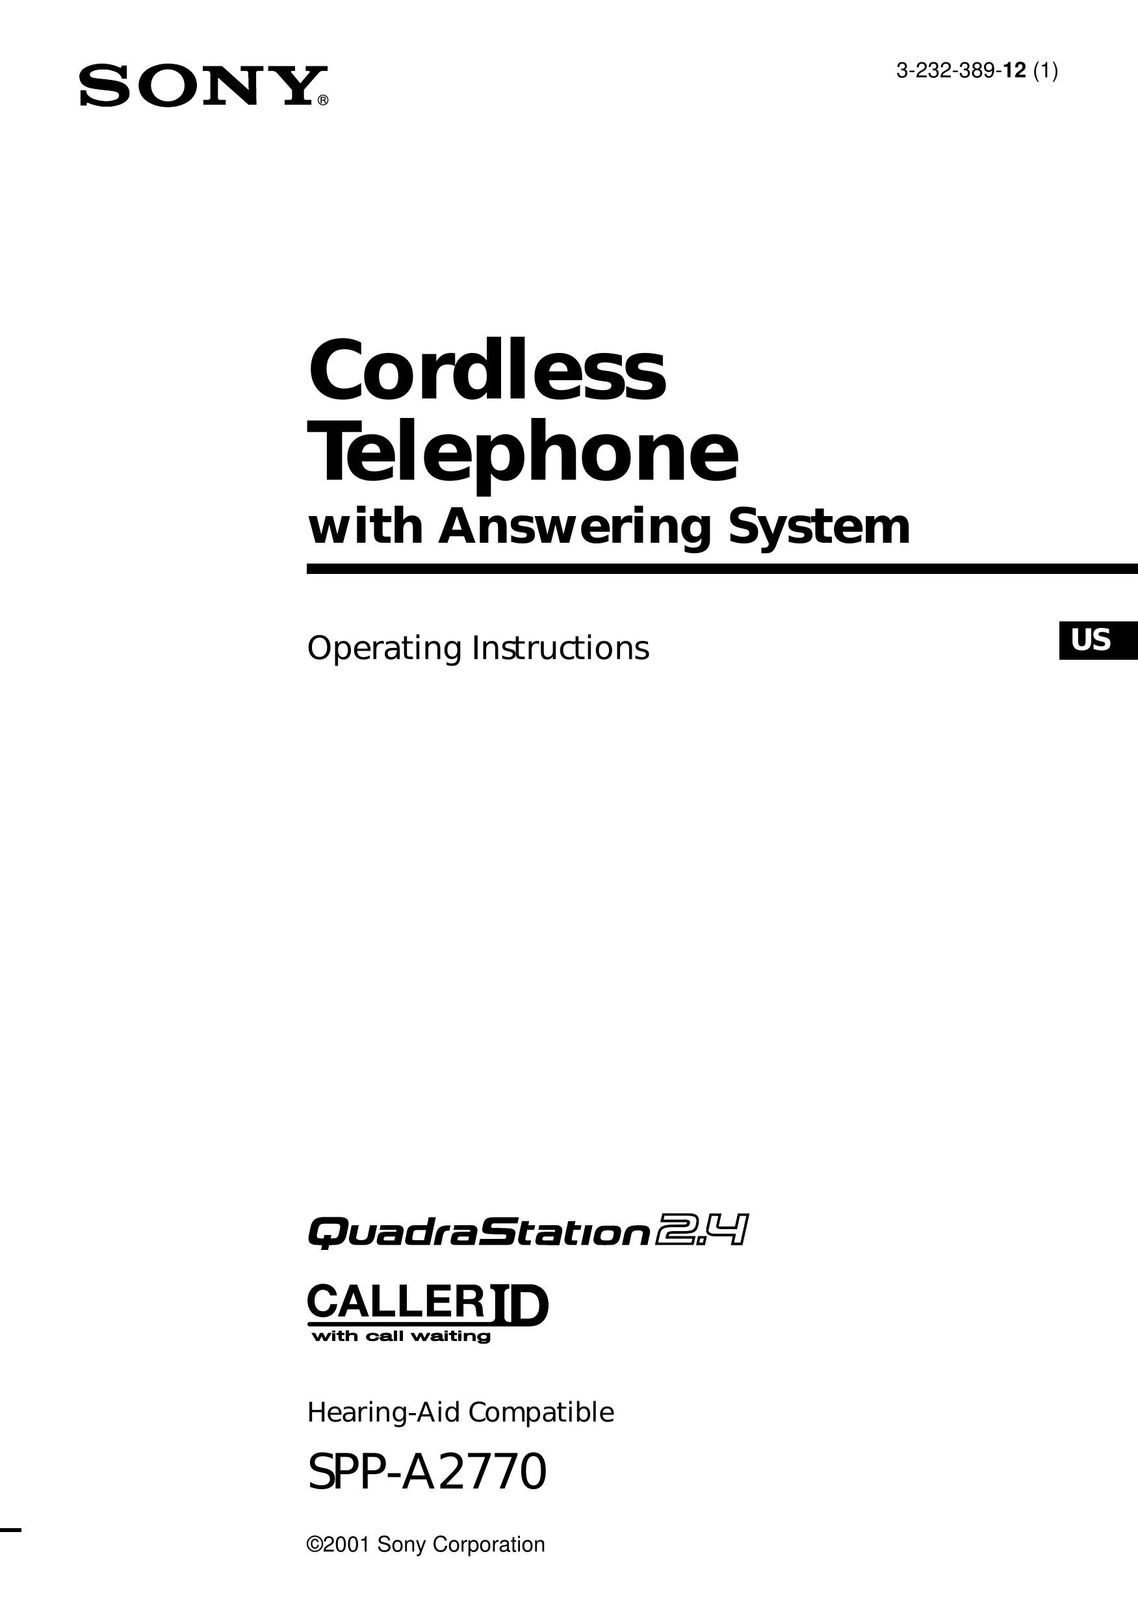 Sony SPP-A2770 Cordless Telephone User Manual